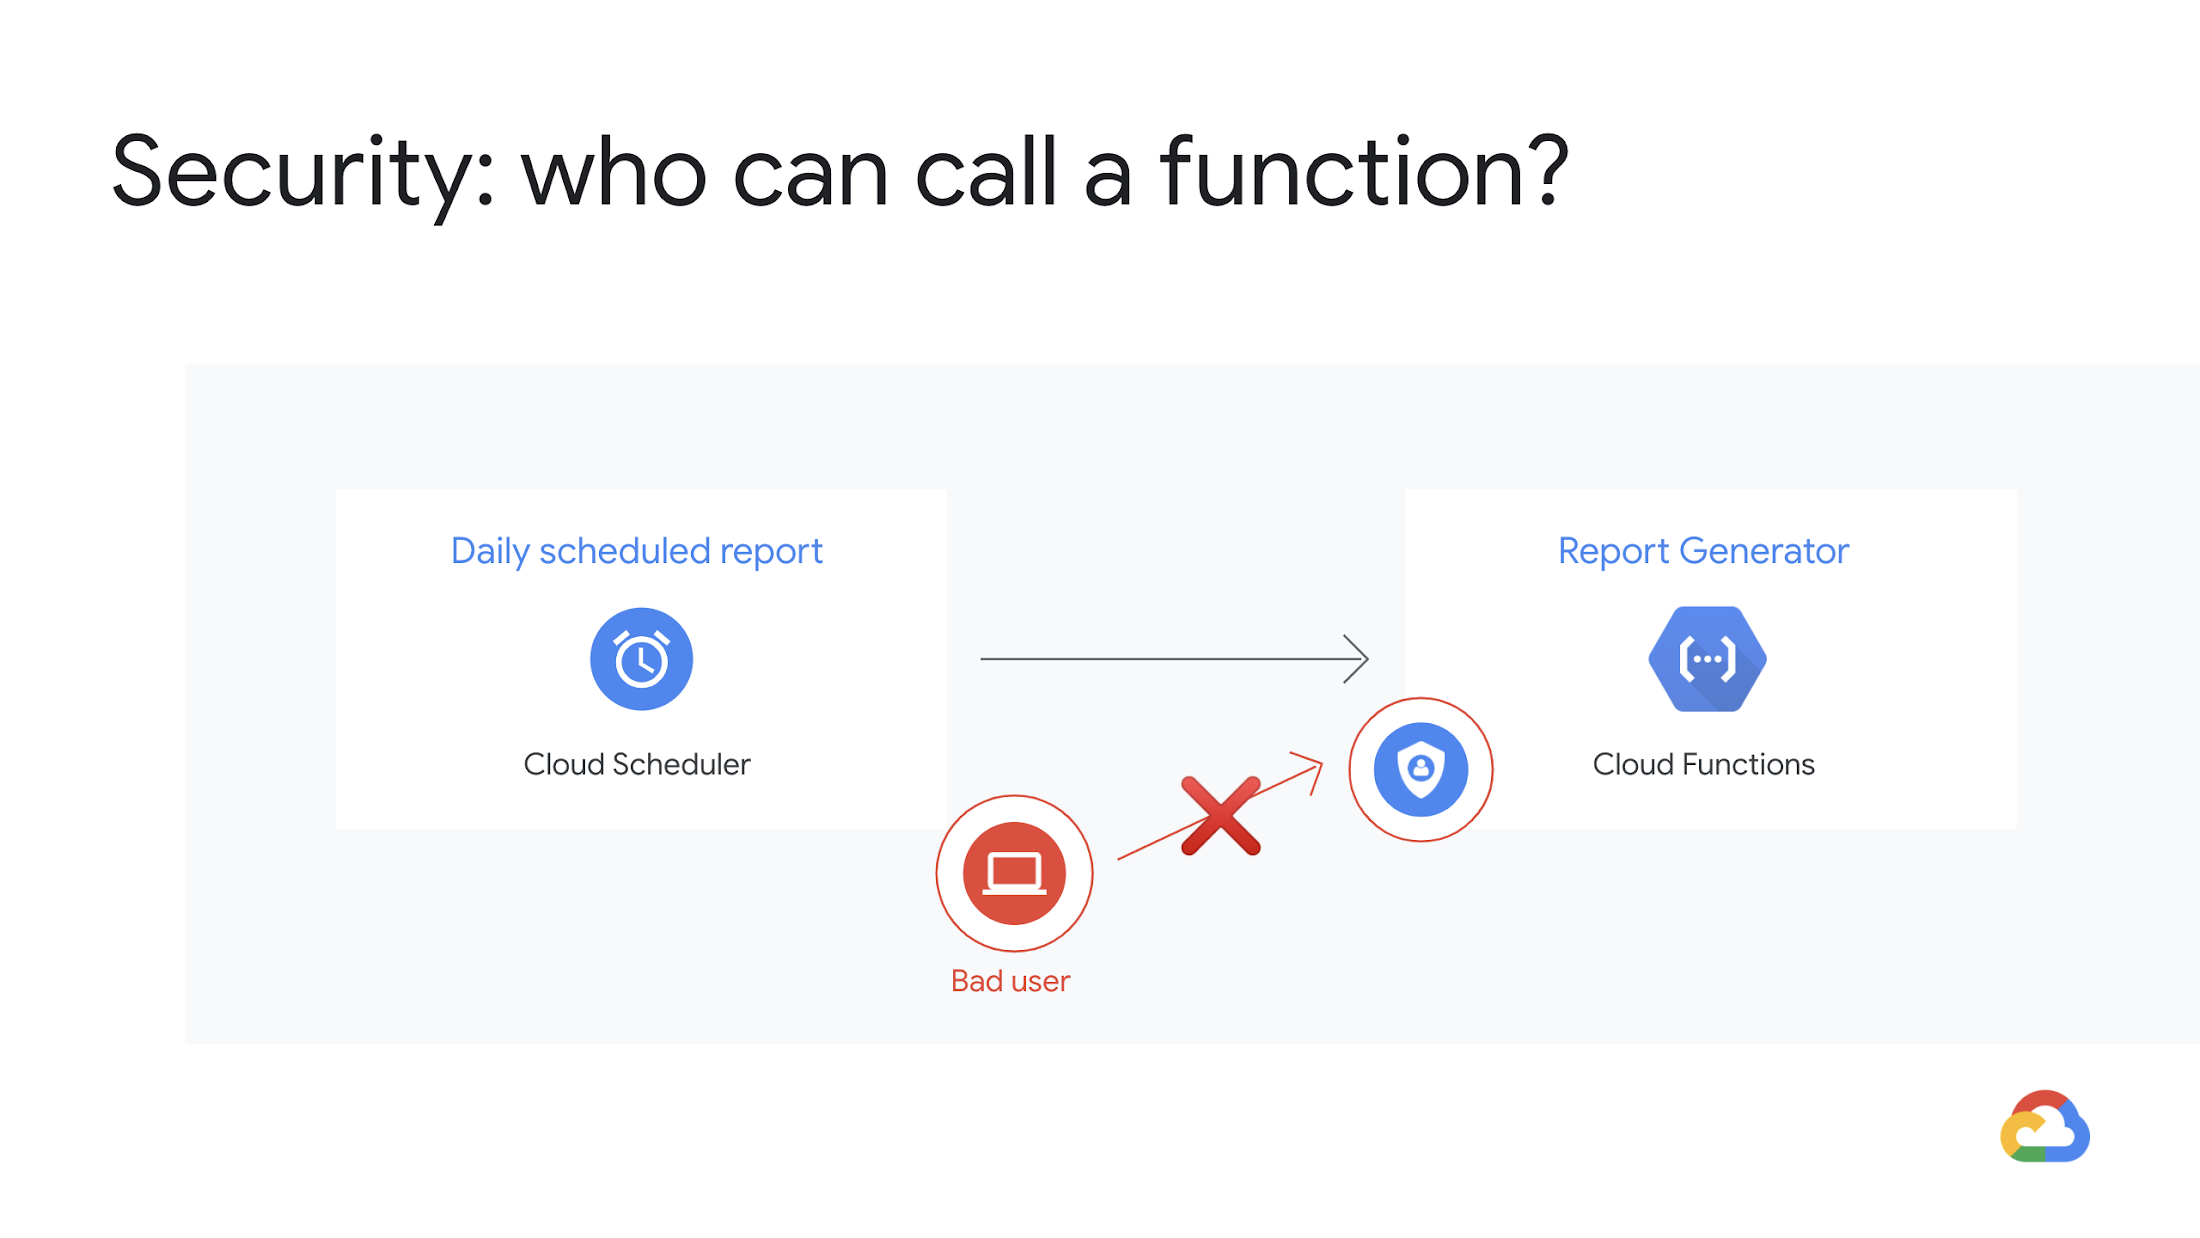 https://storage.googleapis.com/gweb-cloudblog-publish/images/security_call_function.max-2200x2200.png